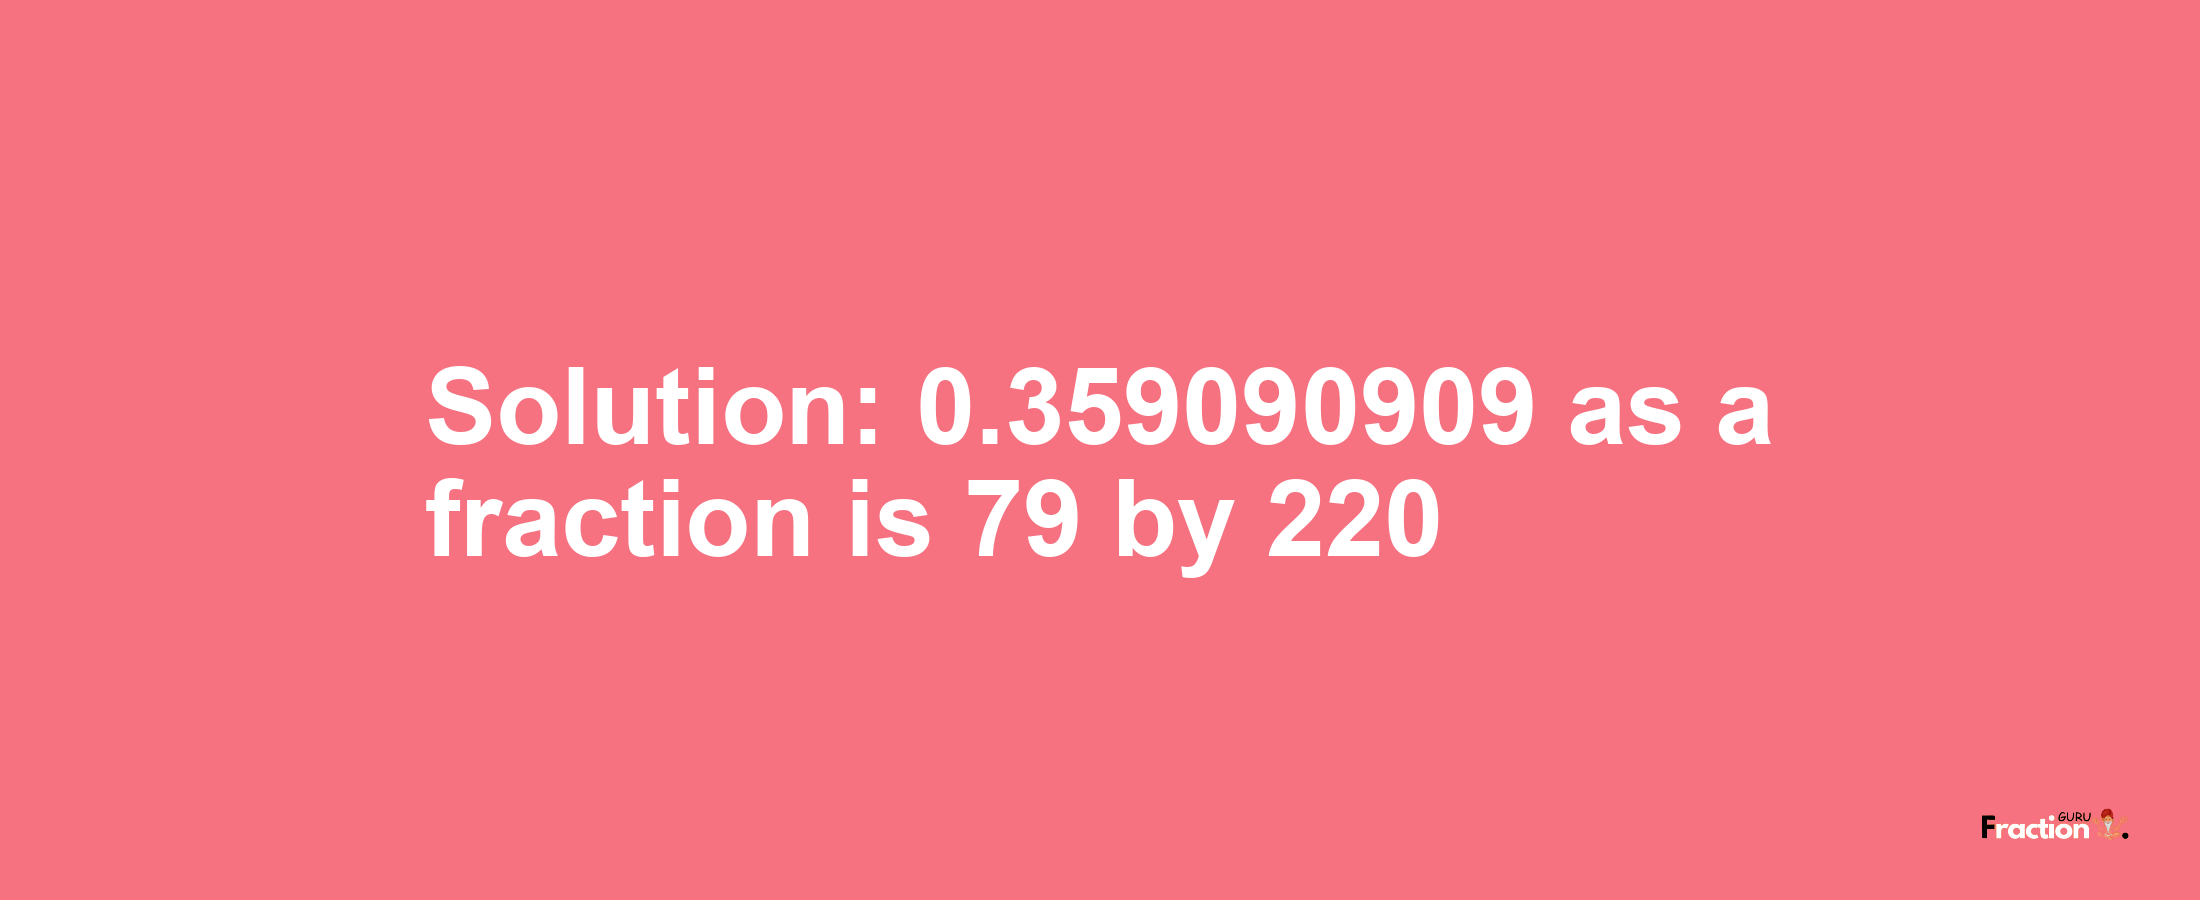 Solution:0.359090909 as a fraction is 79/220